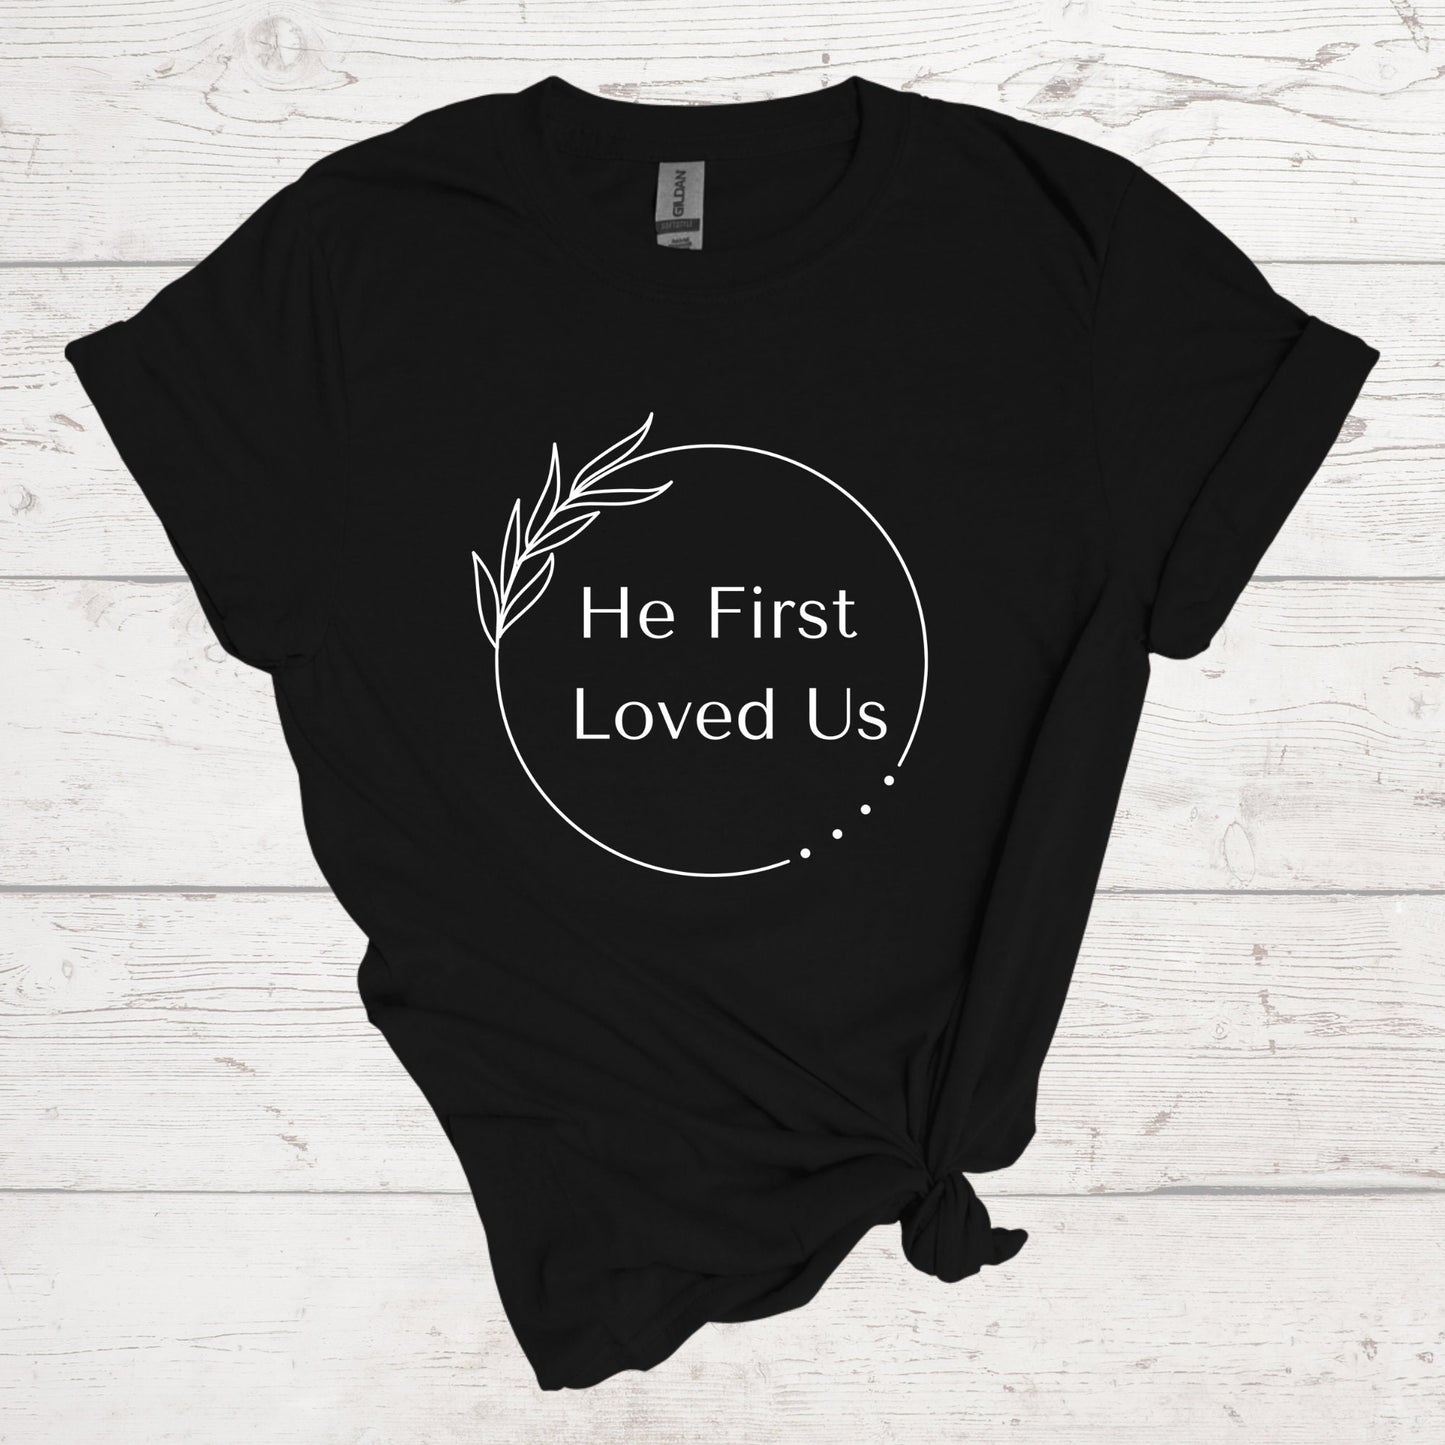 He First Loved Us Shirt